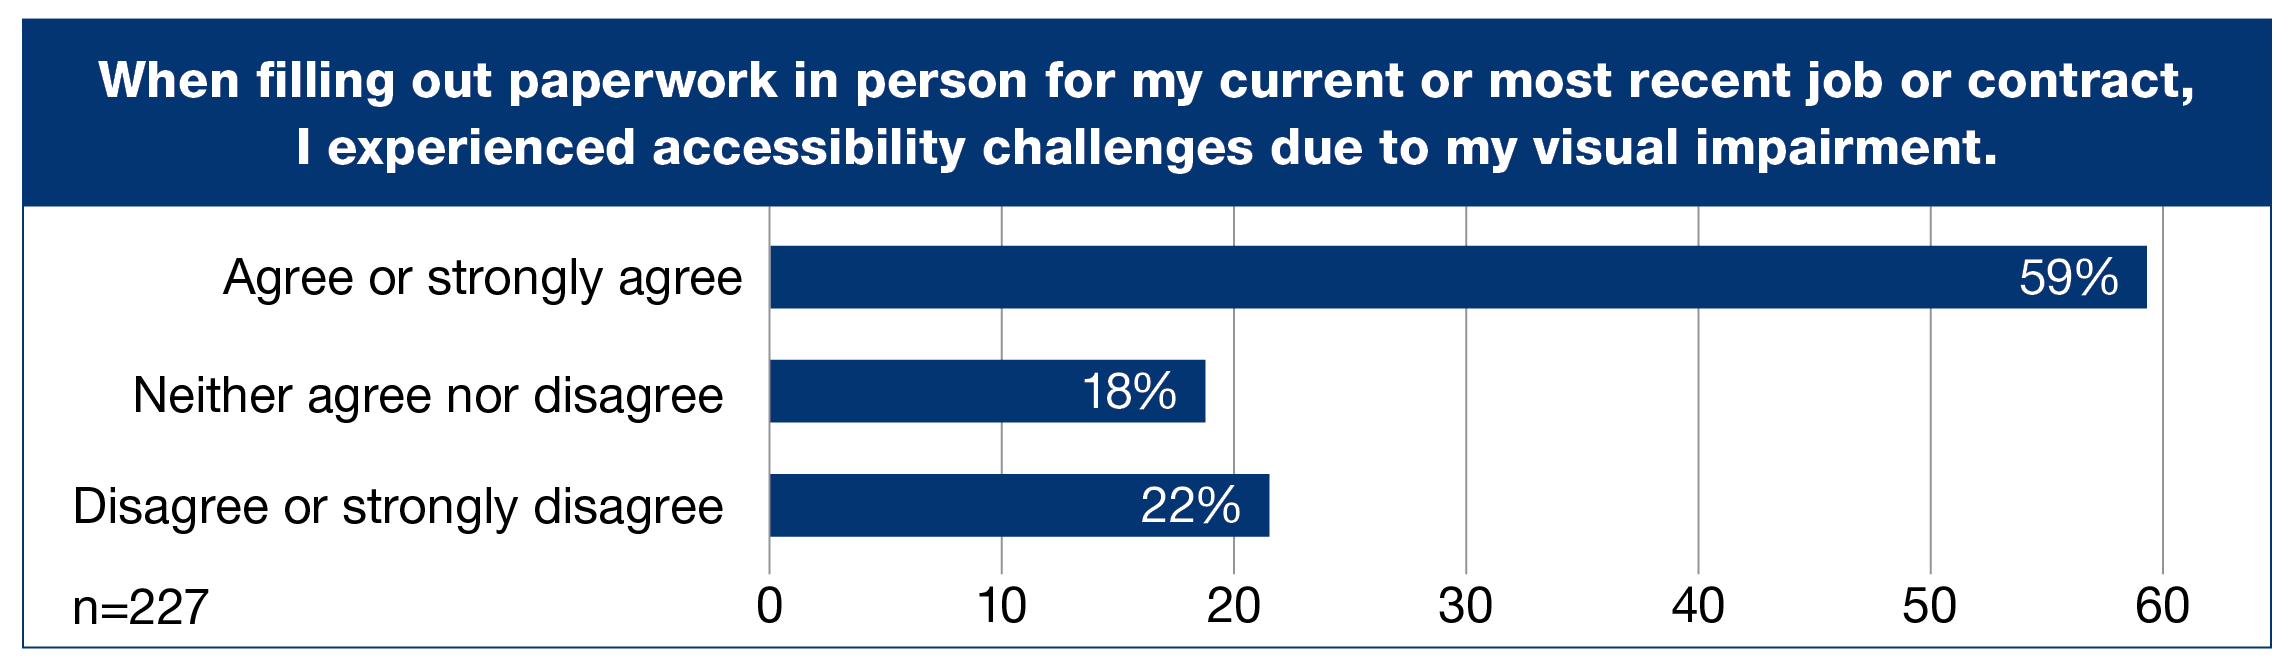 When filling out paperwork in person for my current or most recent job or contract, horizontal bar graph with three bars, I experienced accessibility challenges due to my visual impairment, (Percent of n=227), Agree or strongly agree, 59%; Neither agree nor disagree, 18%; Disagree or strongly disagree, 22%.